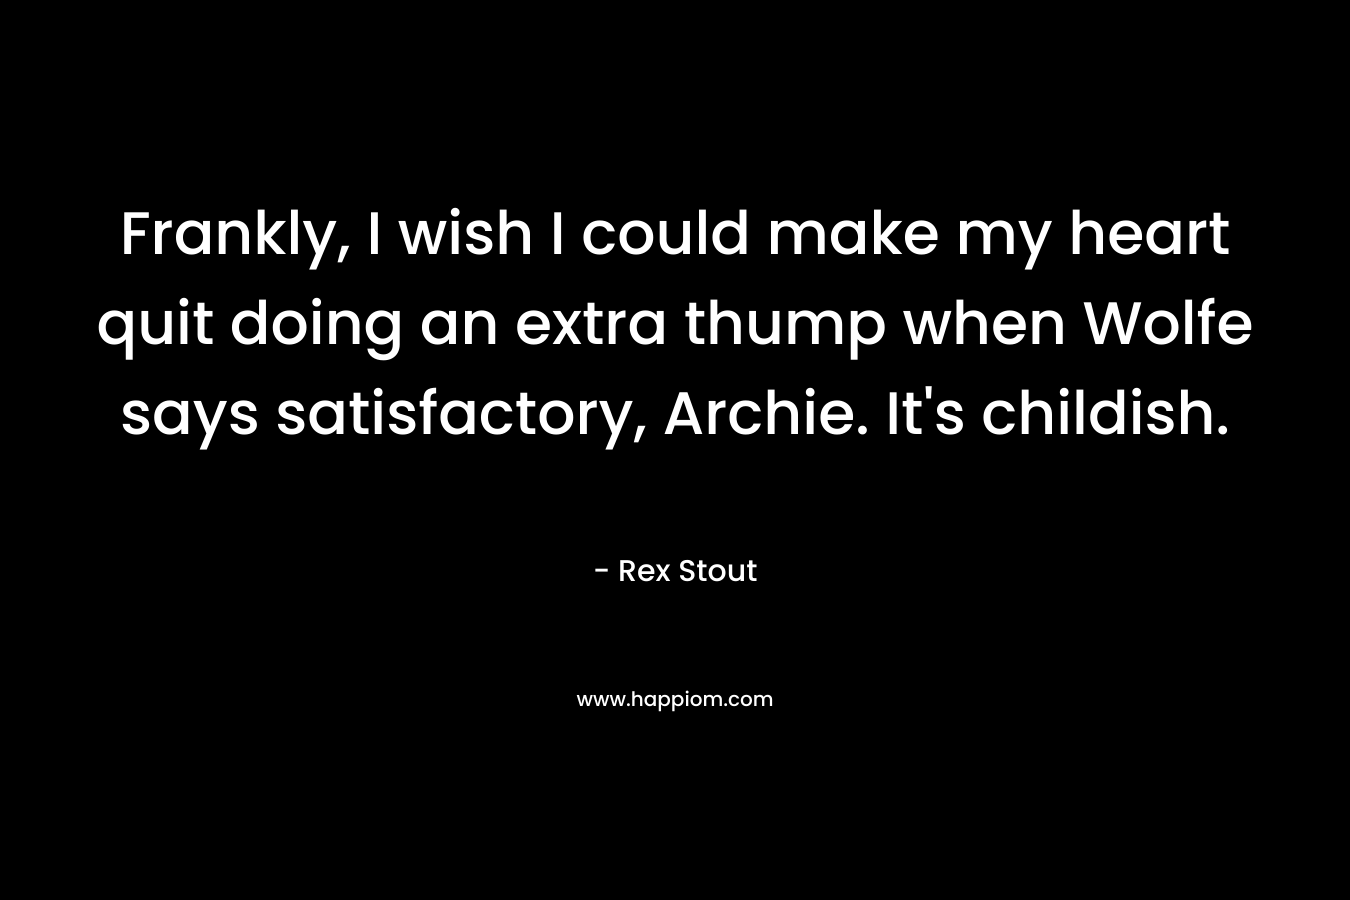 Frankly, I wish I could make my heart quit doing an extra thump when Wolfe says satisfactory, Archie. It’s childish. – Rex Stout